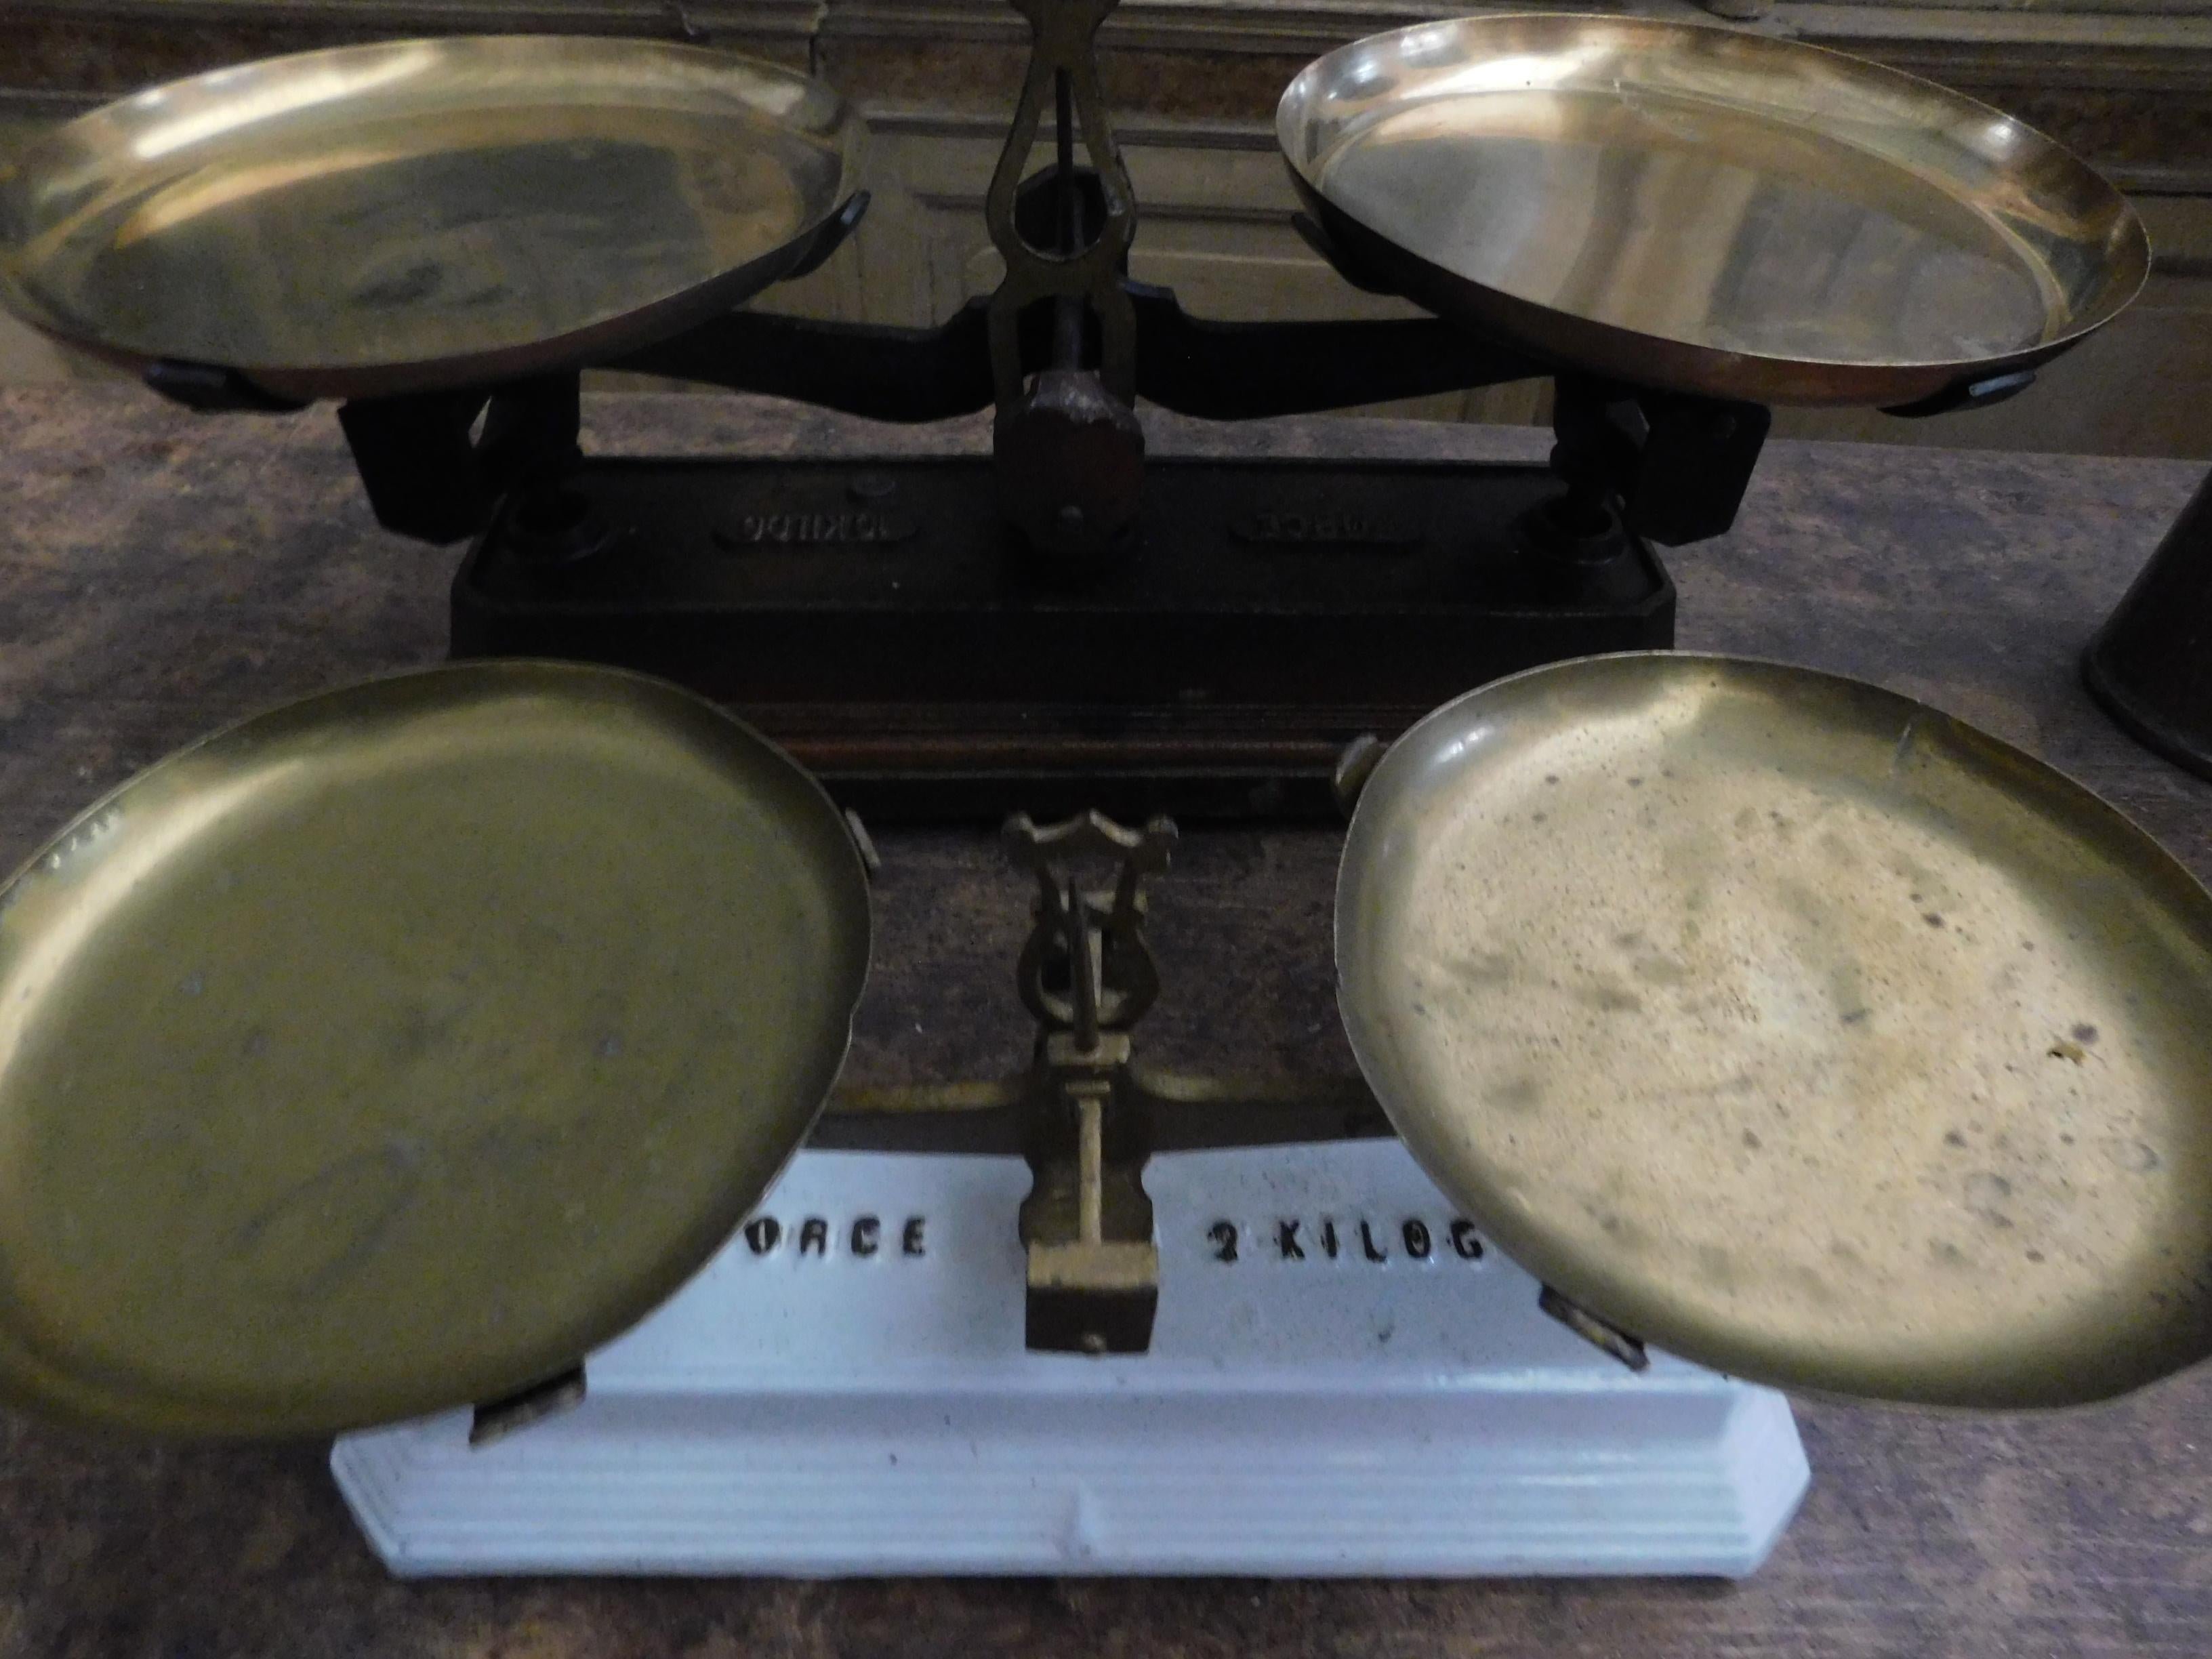 Antique Set 2 Brass Scale, Balance, with Weights, Ceramic and Bronze 1800 France 2